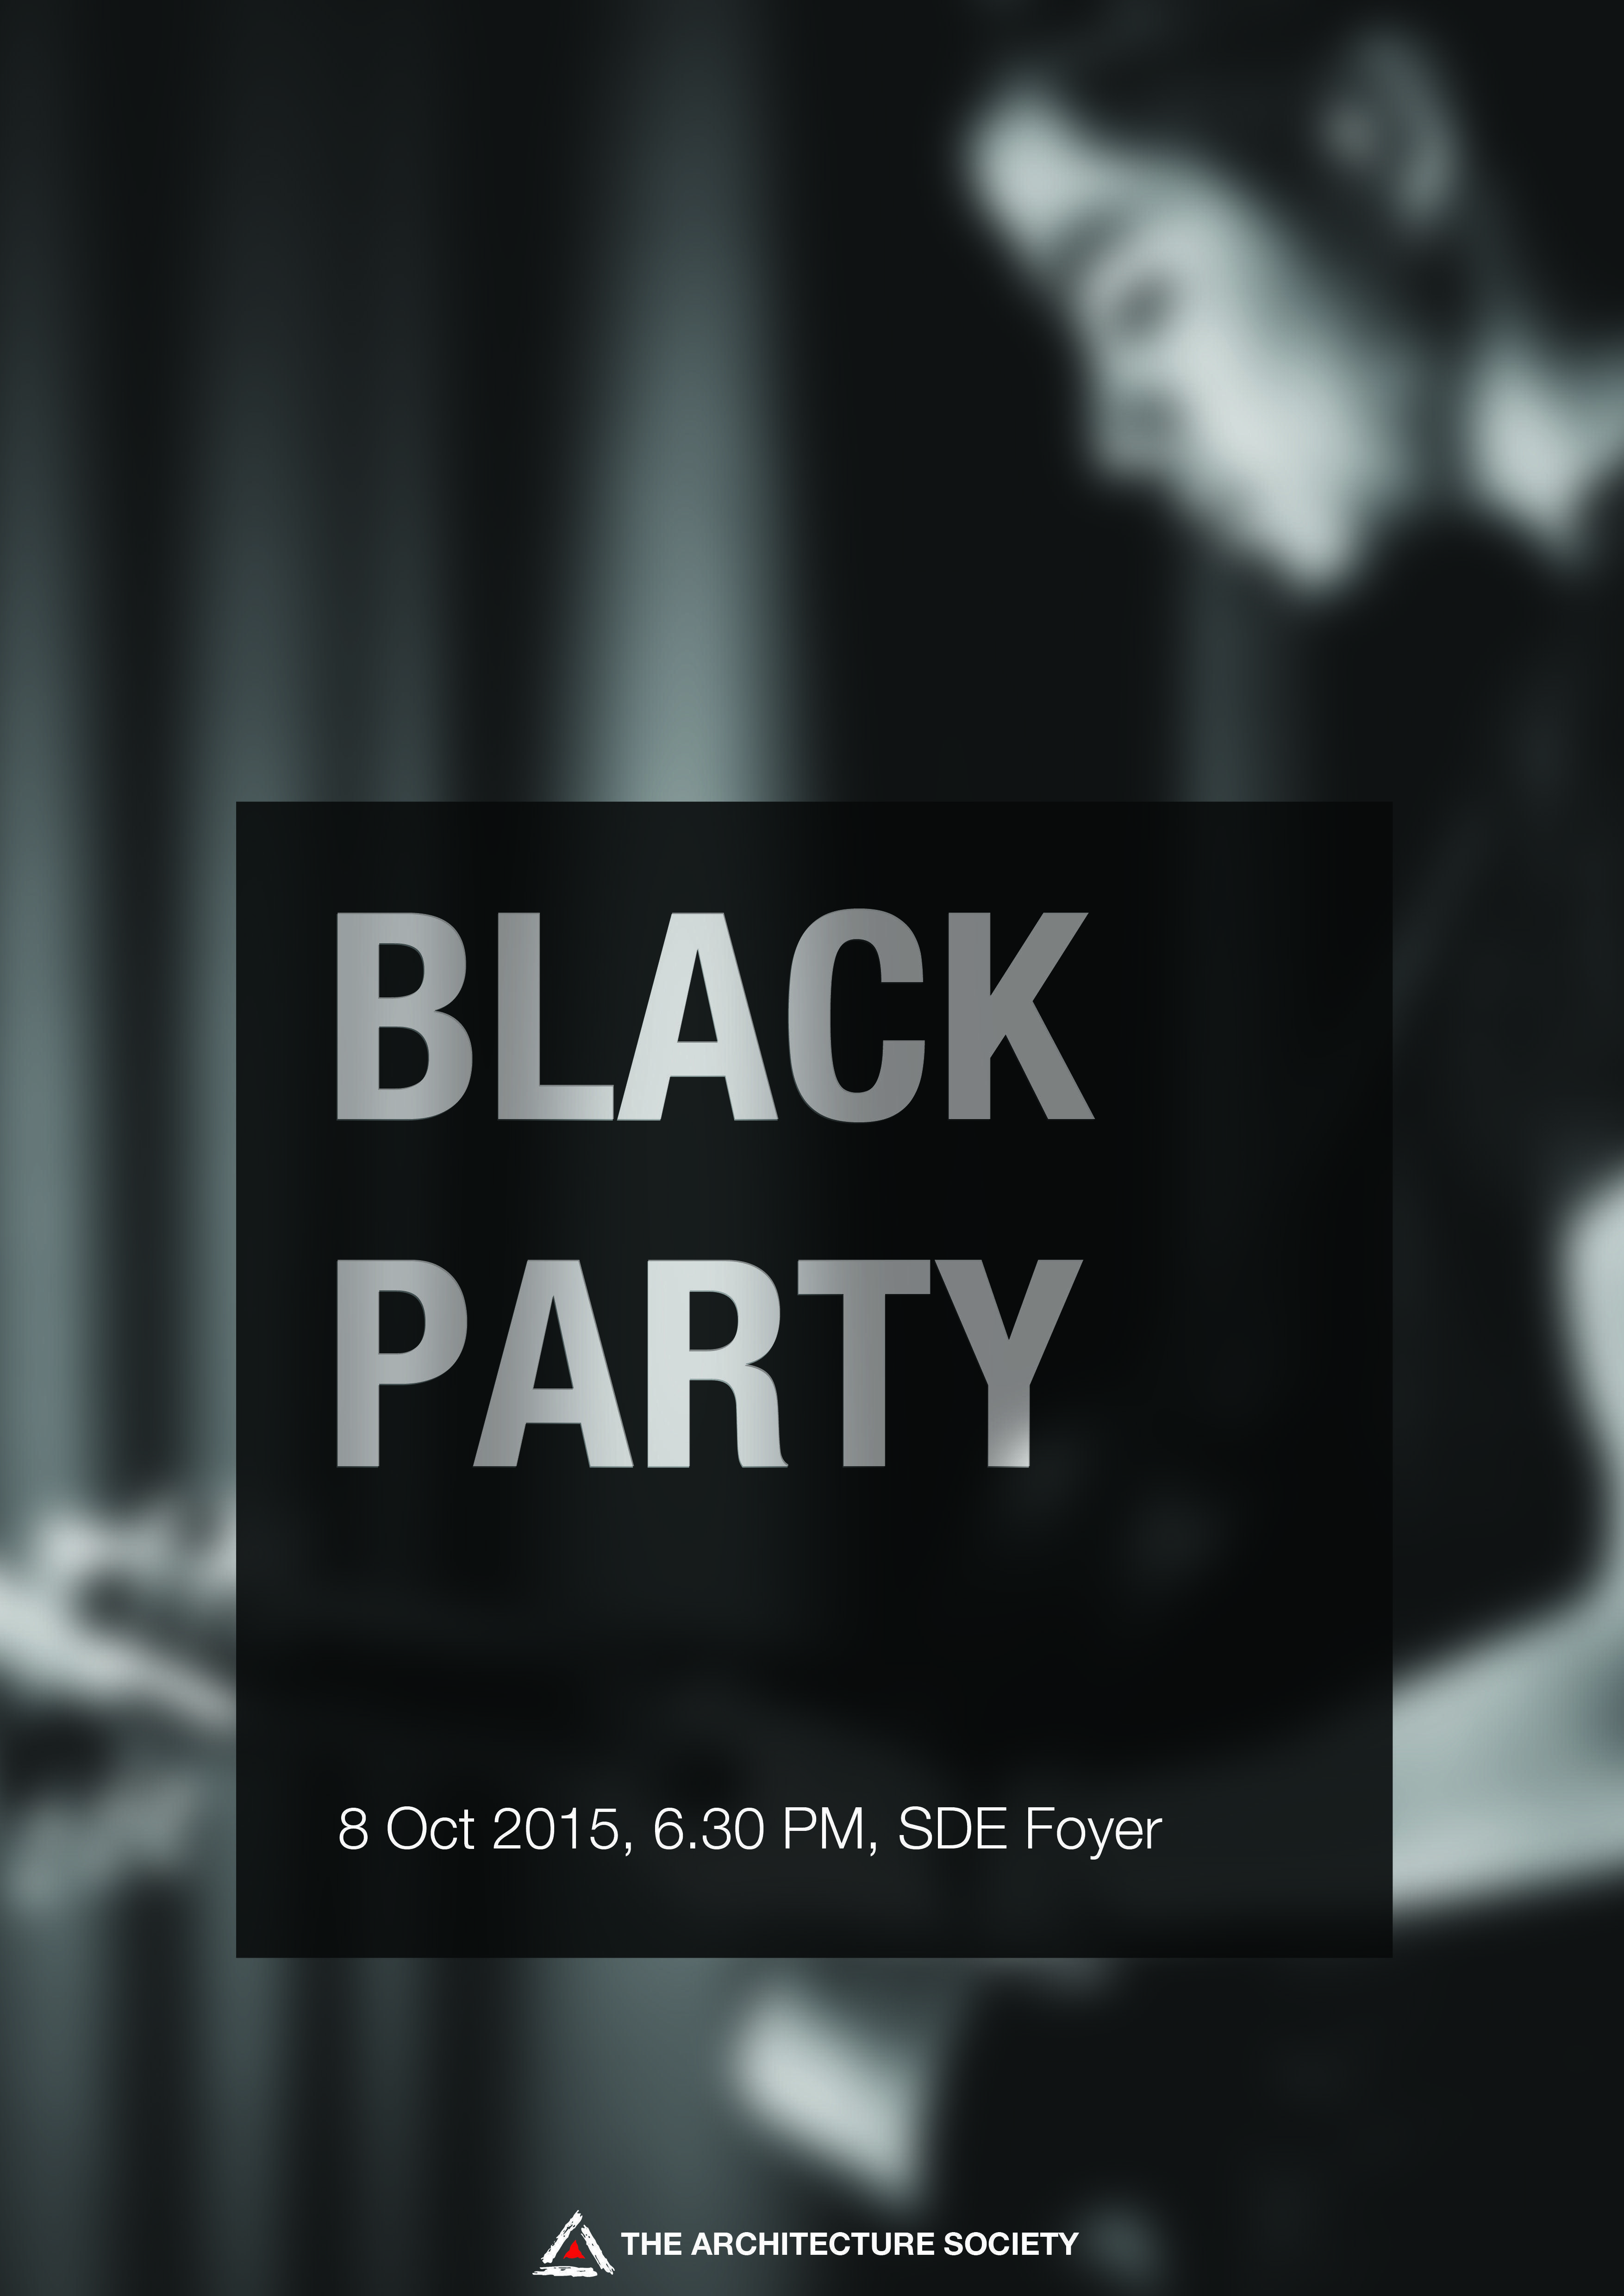 Black Party Logo - BLACK PARTY 2015 | The Architecture Society